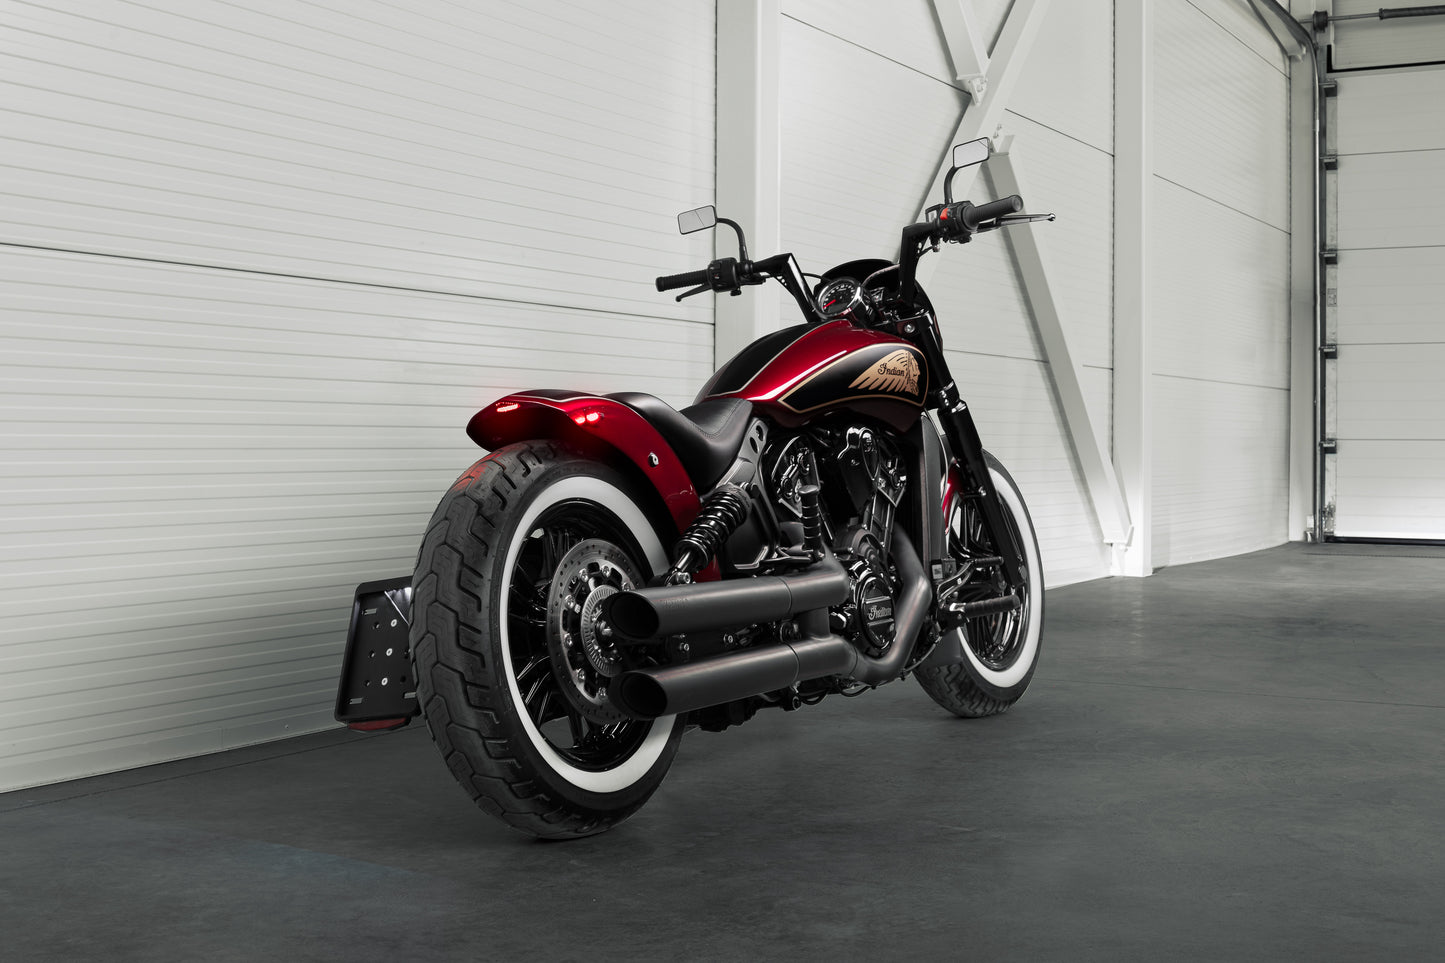 Harley Davidson motorcycle with Killer Custom "Tomahawk" rear fender from the rear in a modern white garage